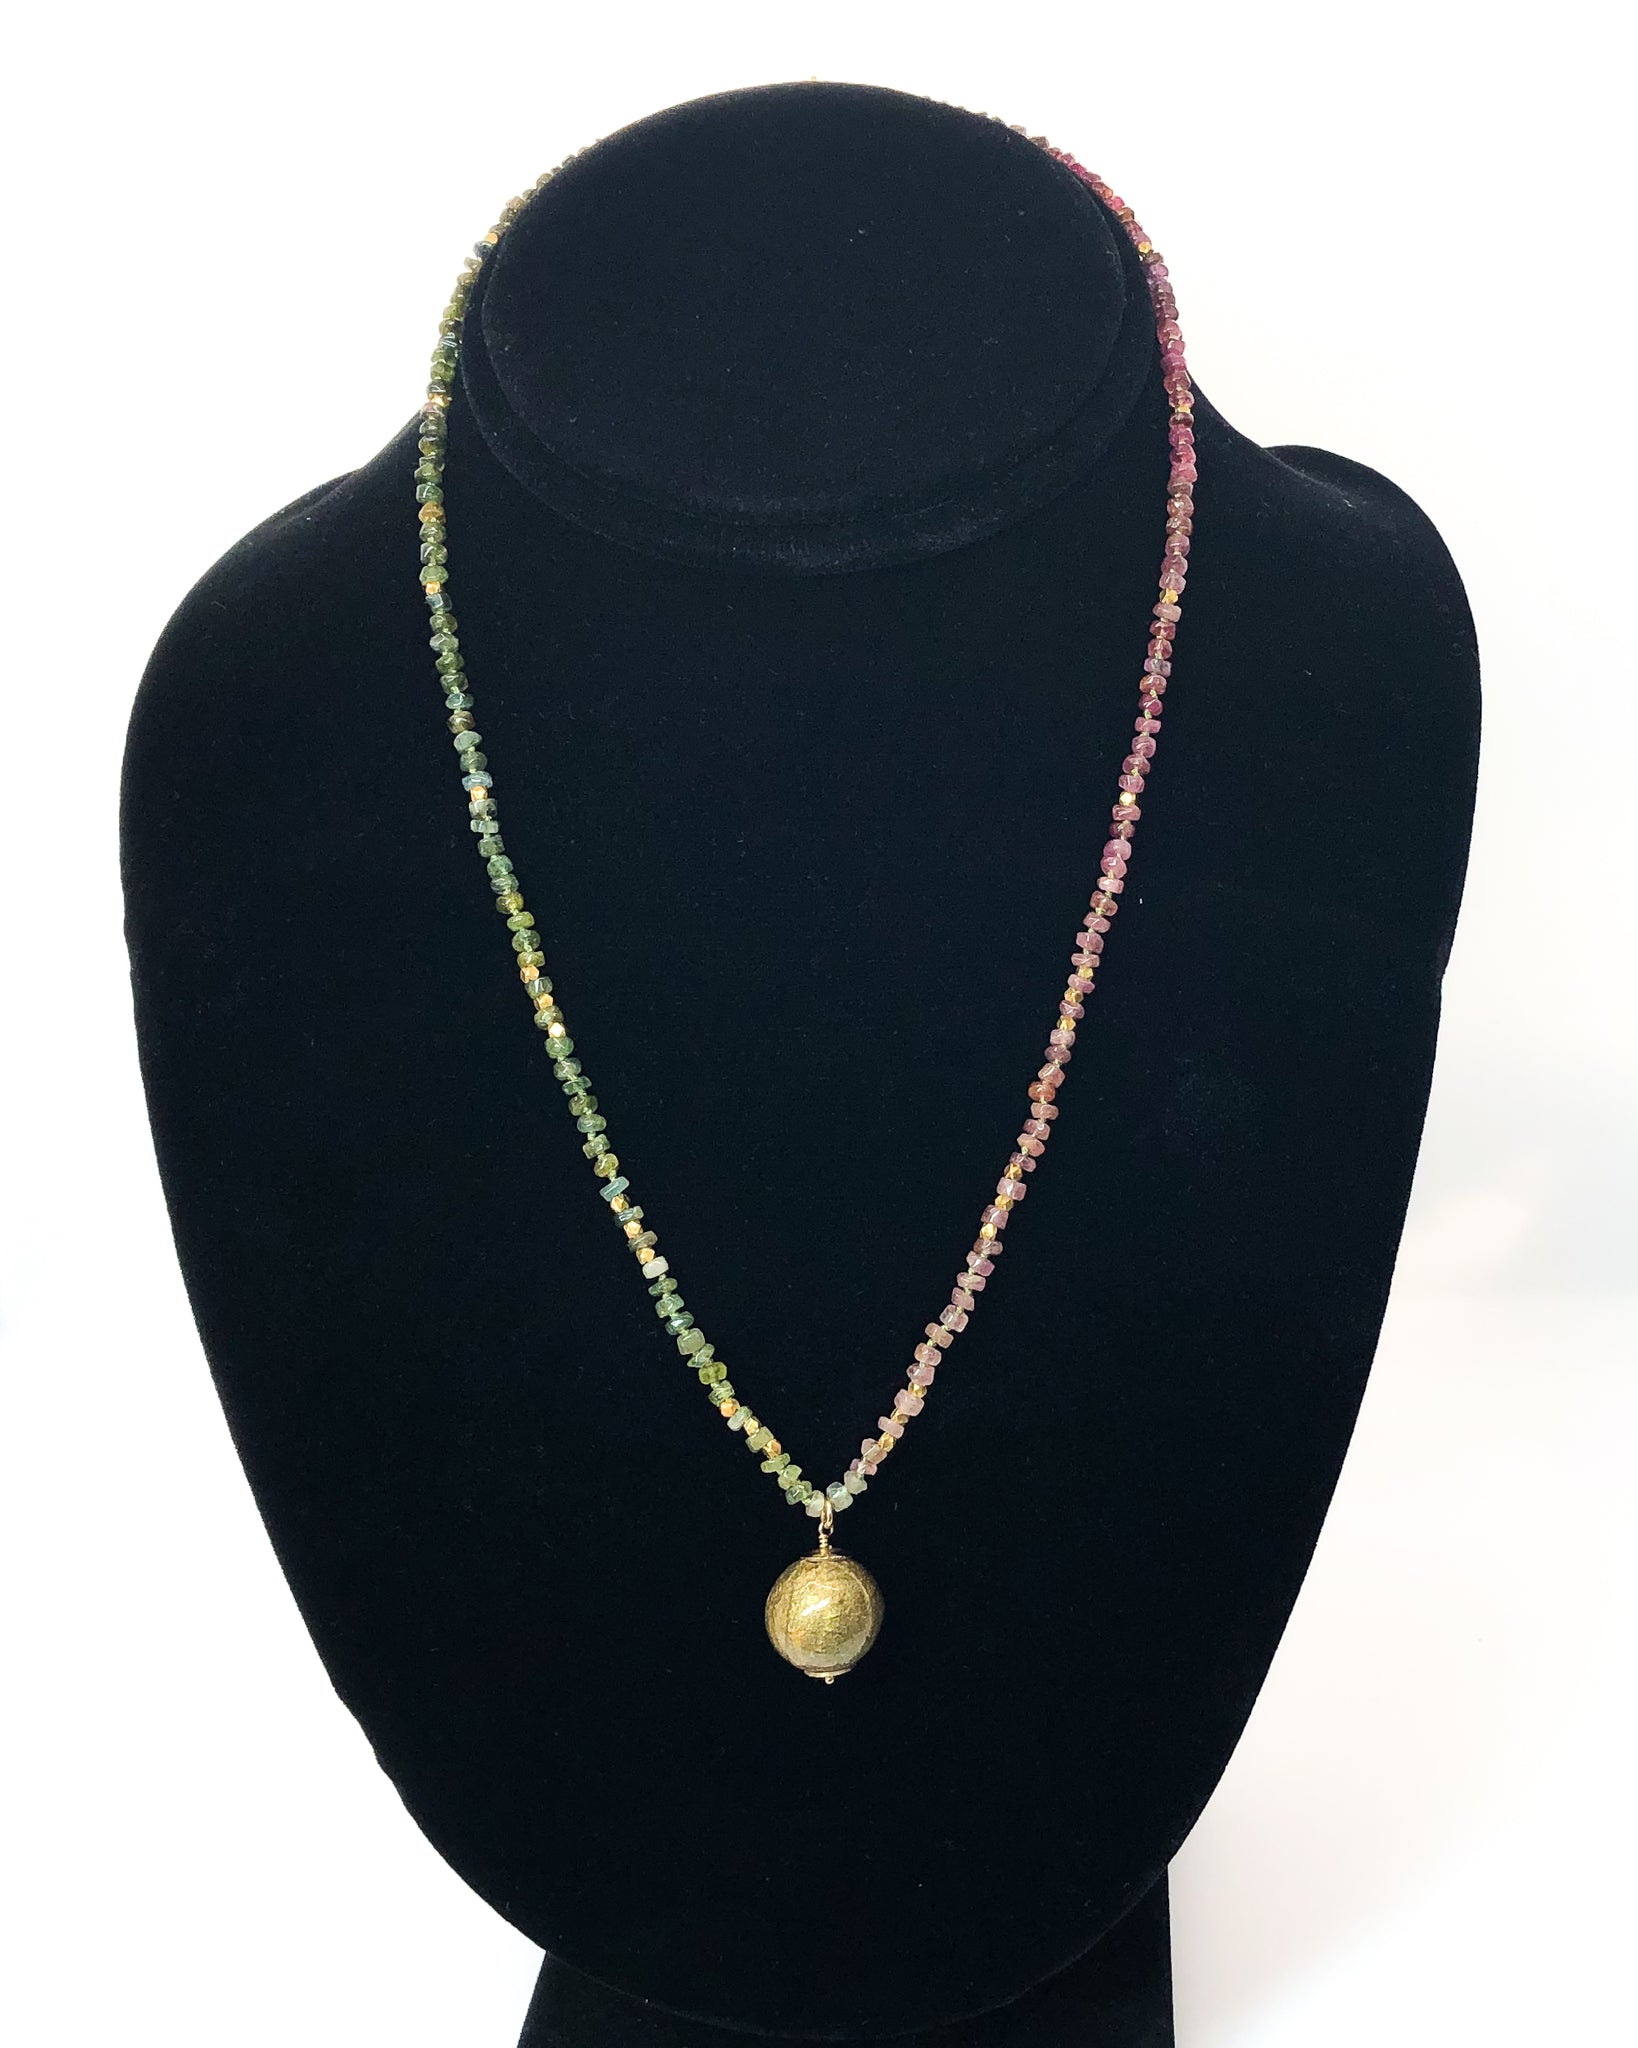 Knotted Green and Pink Tourmaline Necklace with Handmade Paper Bead Pendant